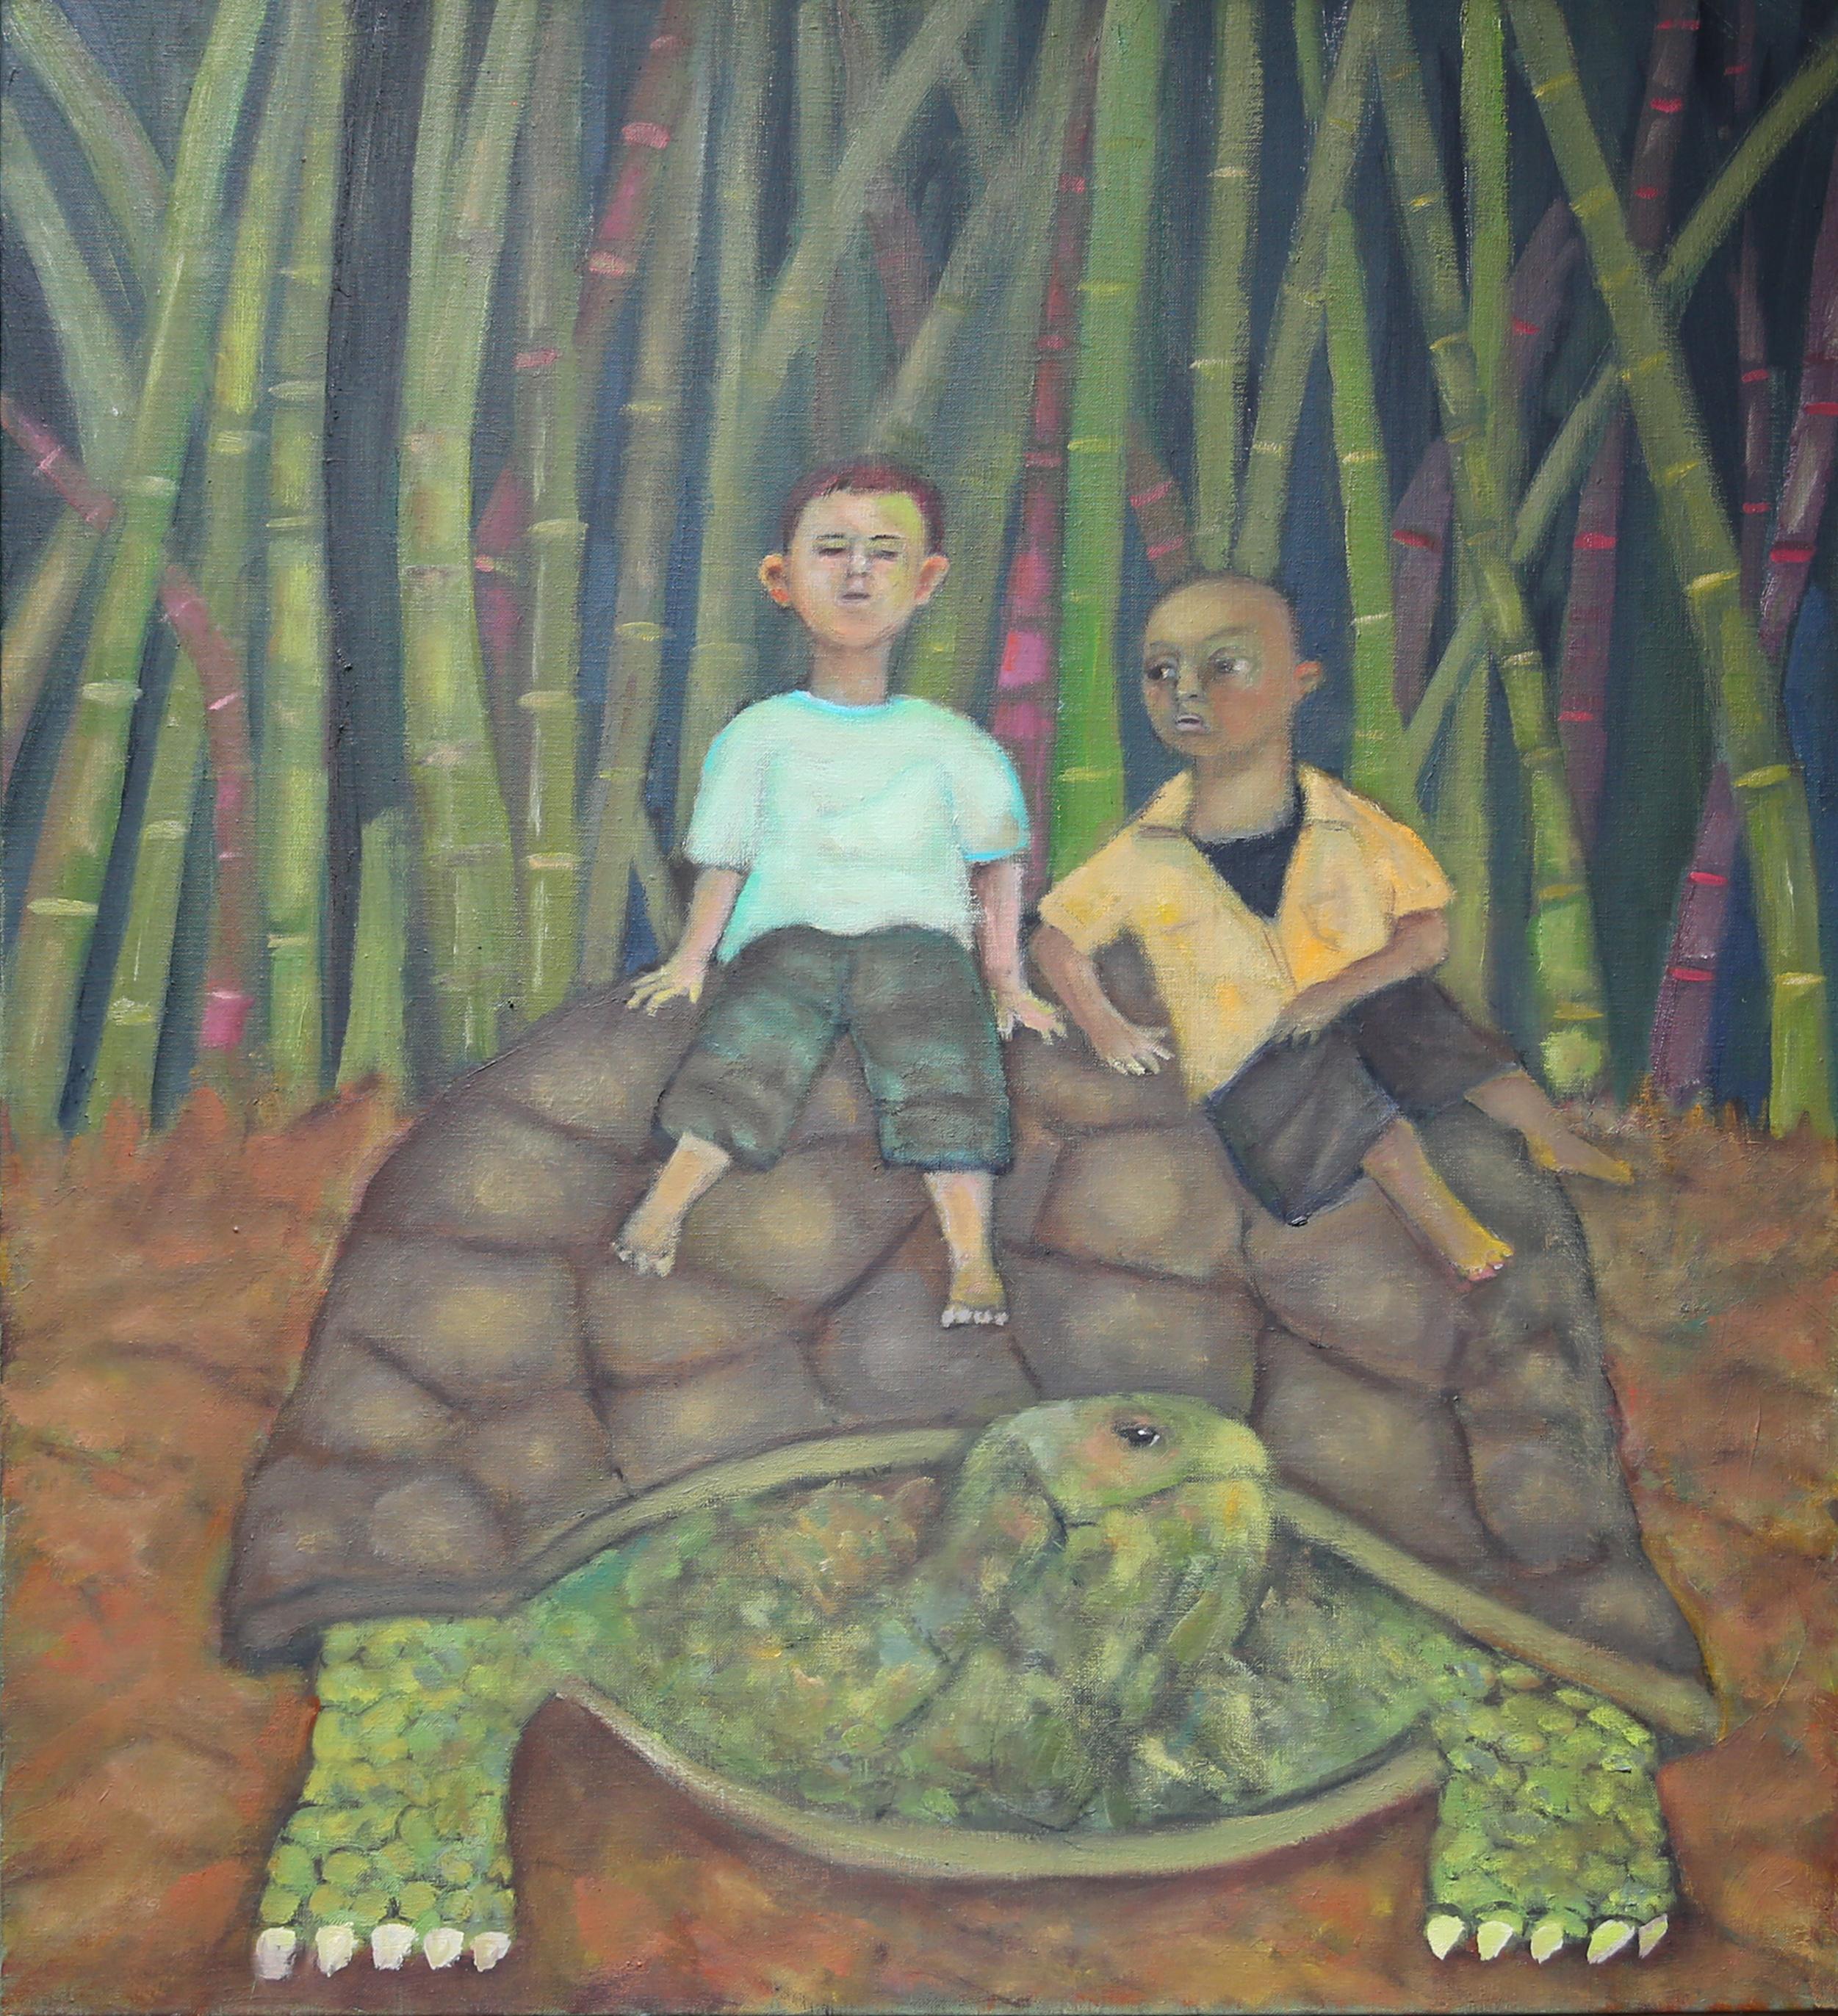 Stephen Basso Animal Painting - Hitchhikers, turtle & boys children soft dreamy green colors bamboo